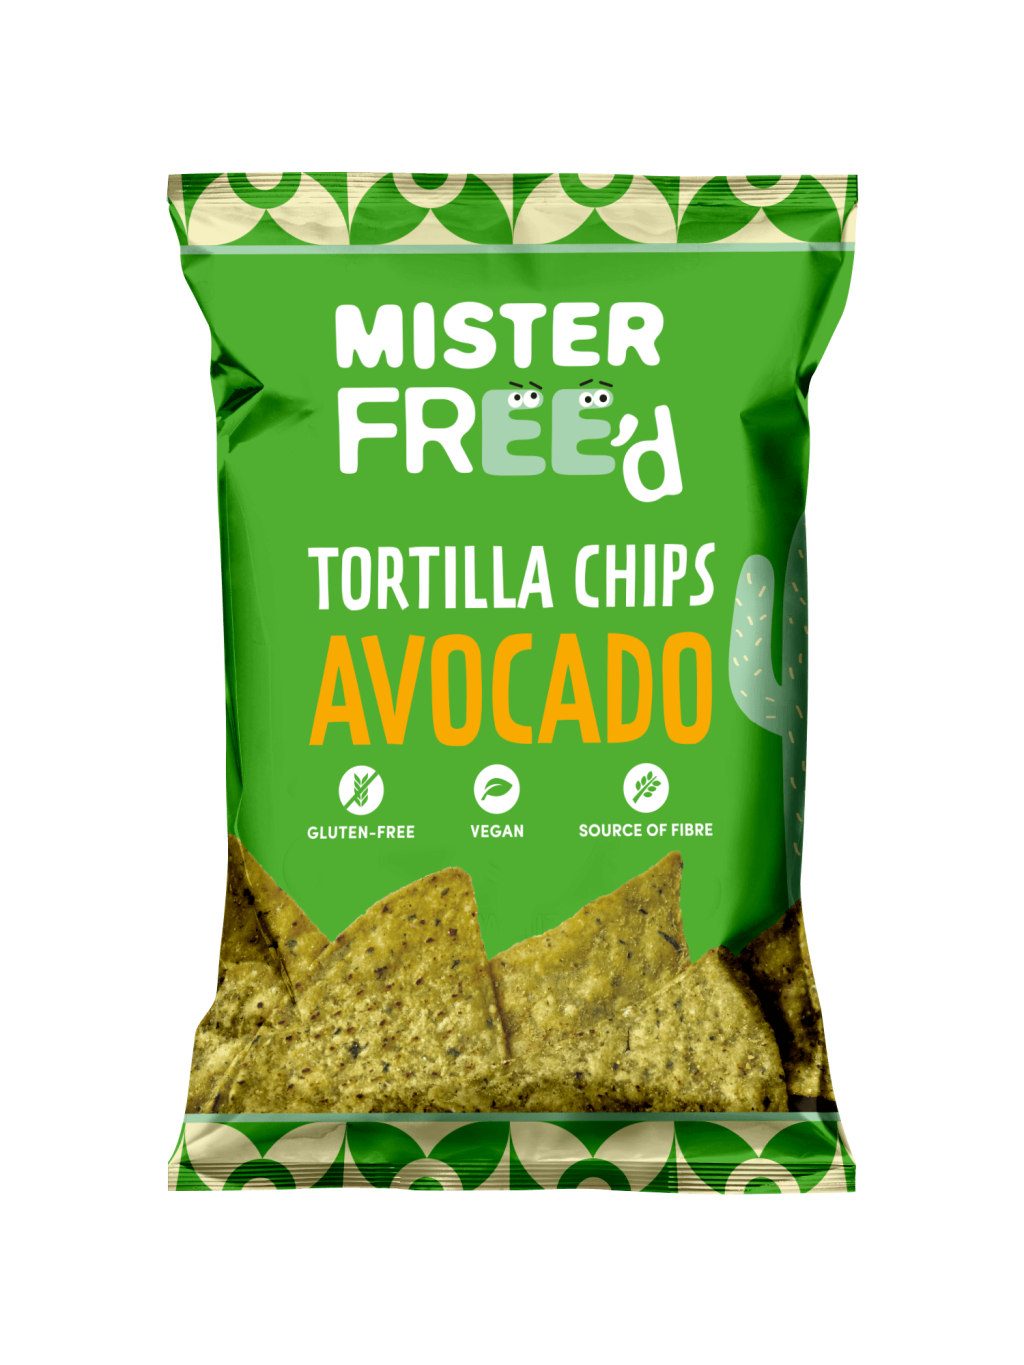 MISTER FREE'D Tortilla Chips With Avocado